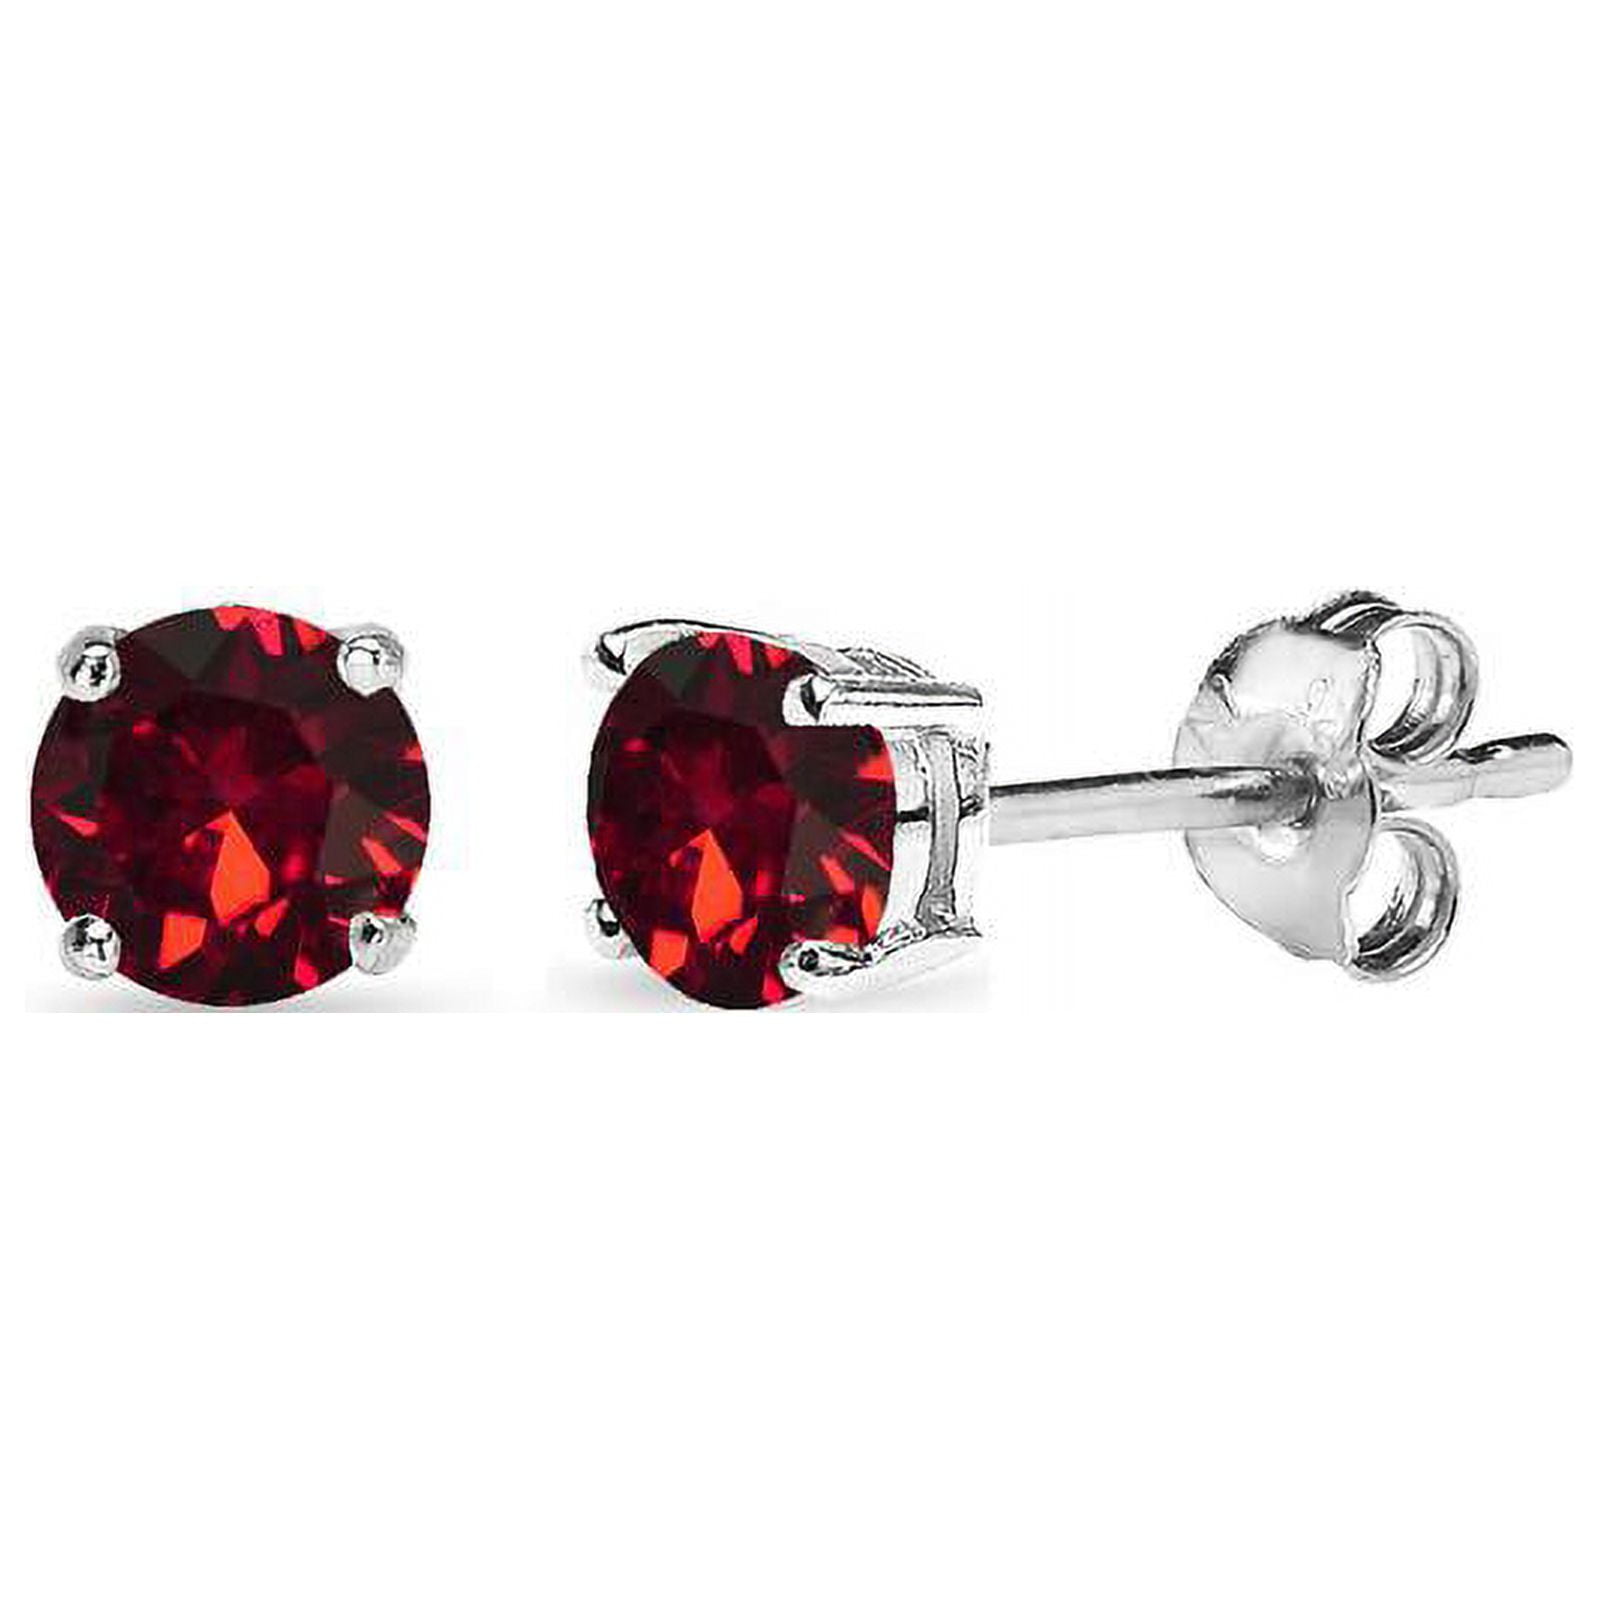 Gold plated button earrings red Swarovski crystal romantic - Ruby Lane